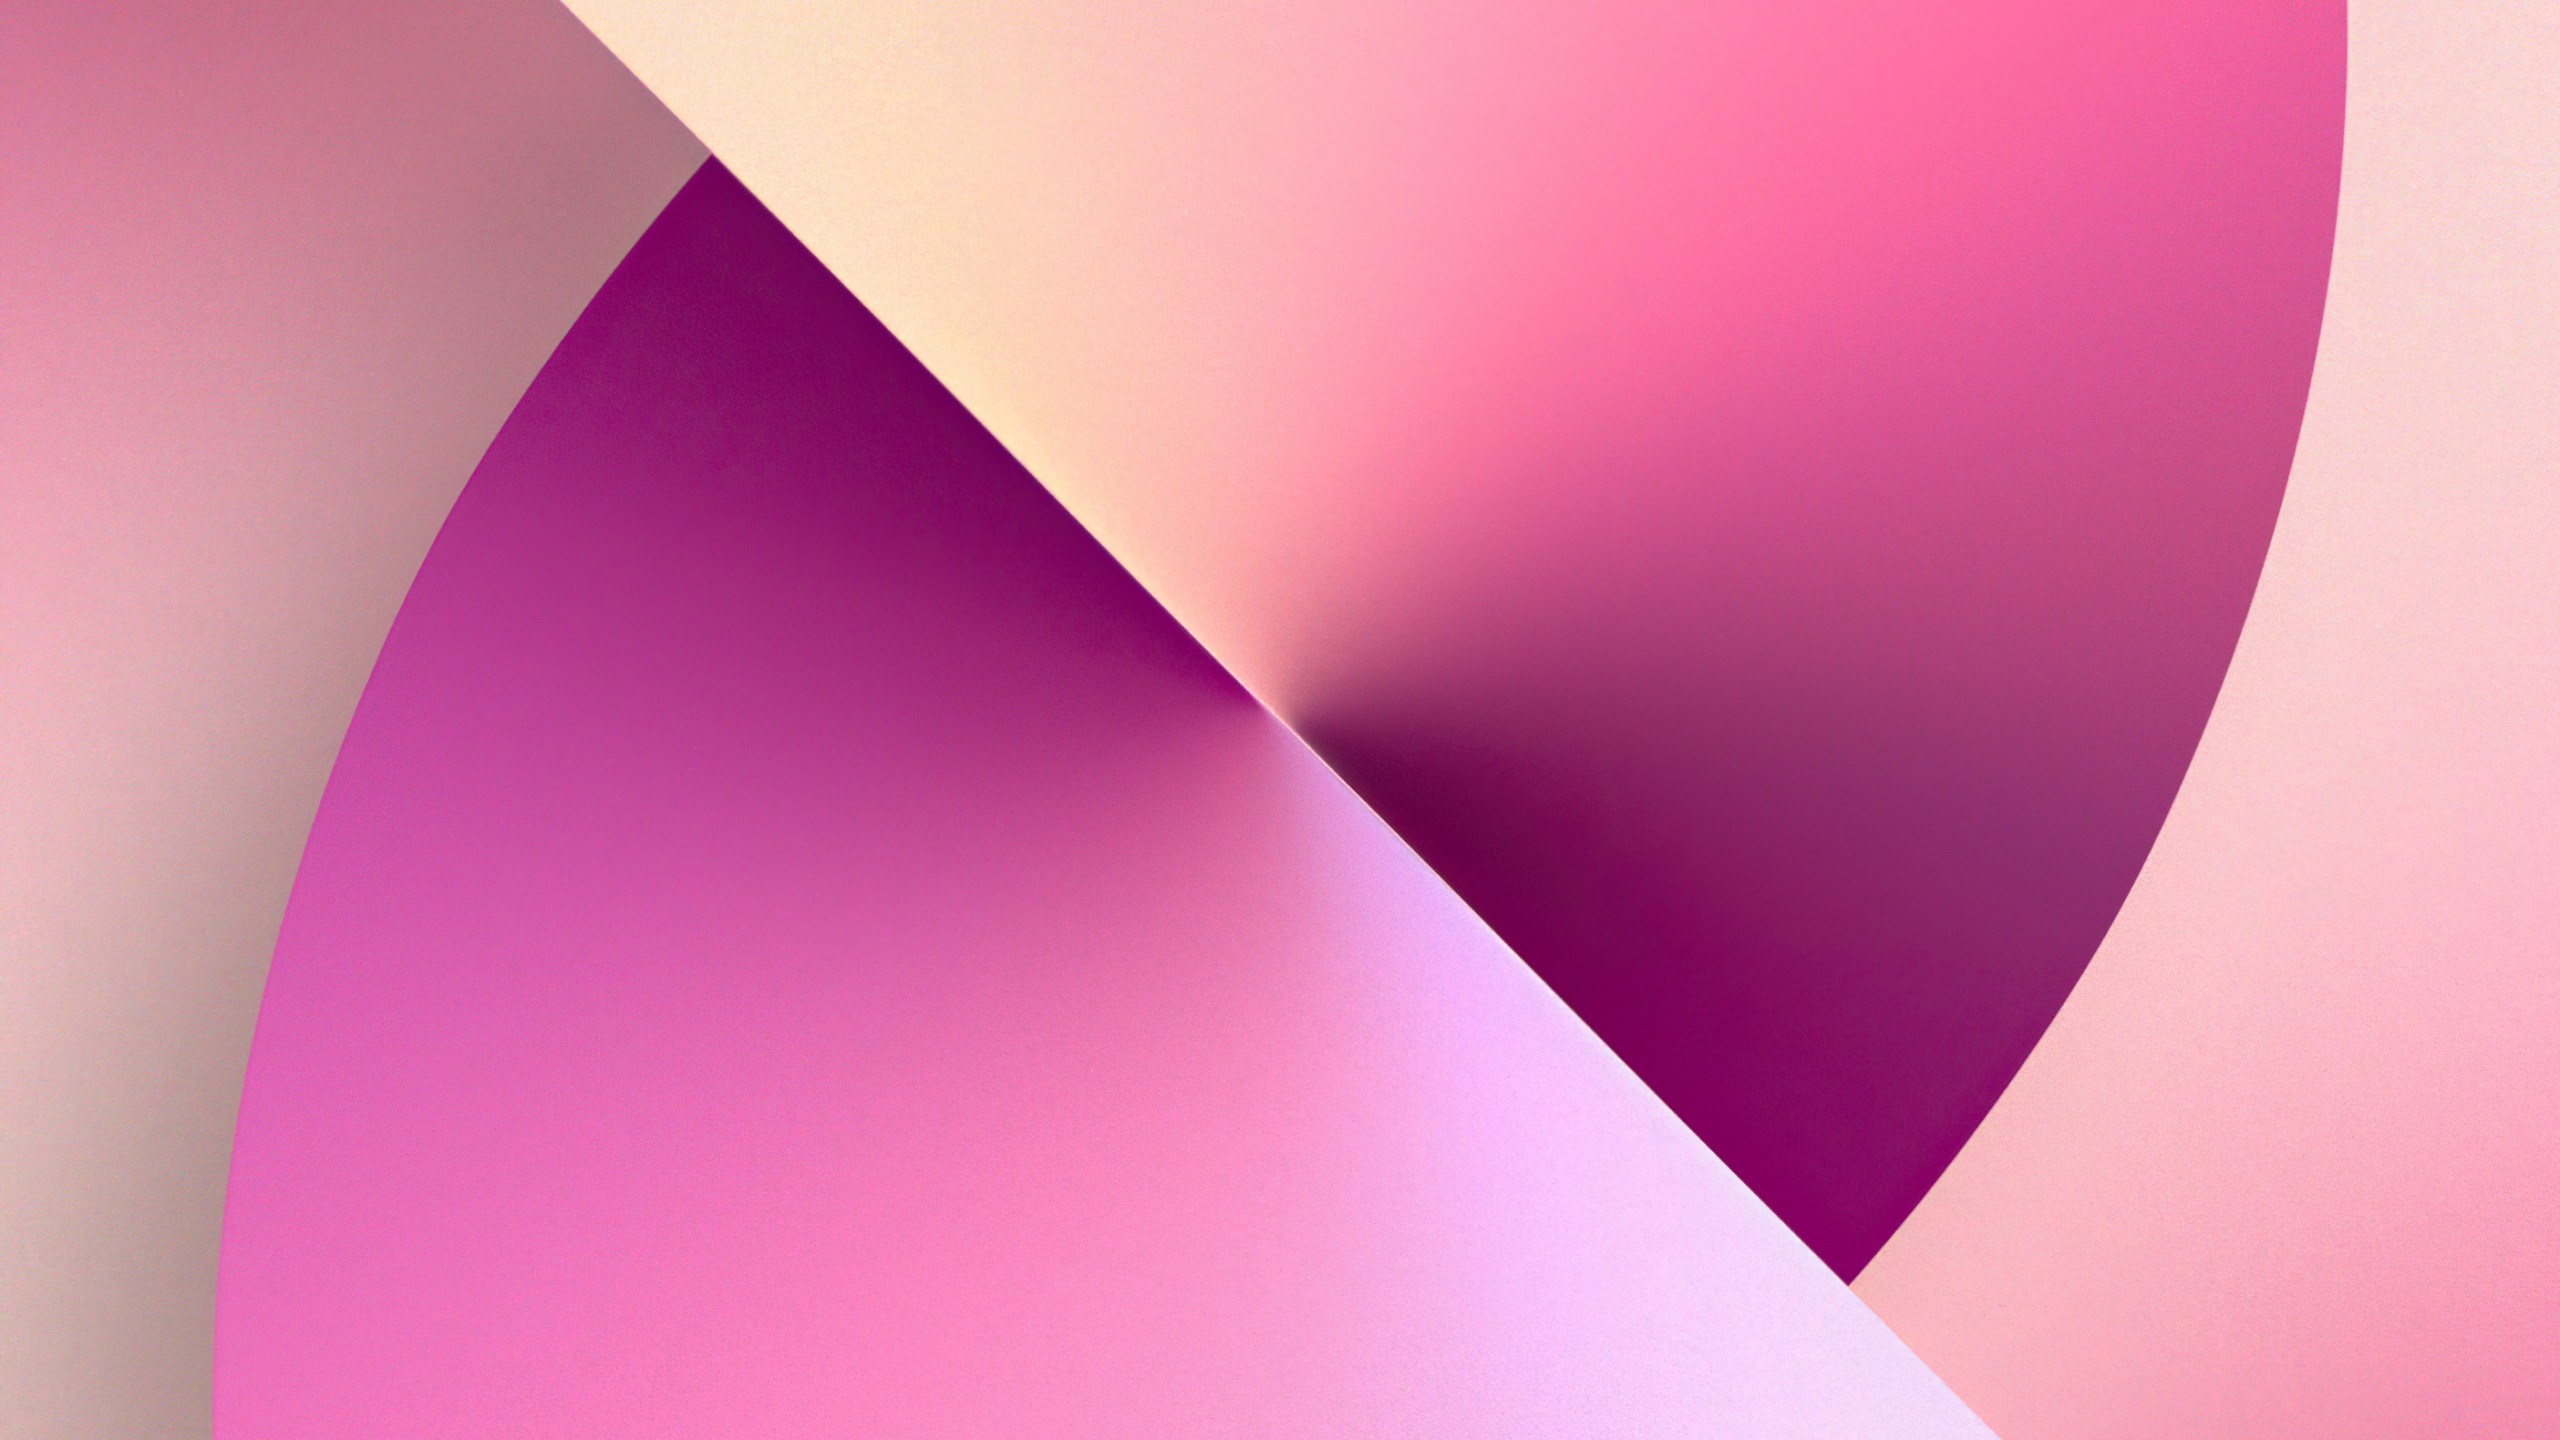 Special design in pink purple tones for the Apple iPhone 14 series 4K  wallpaper download